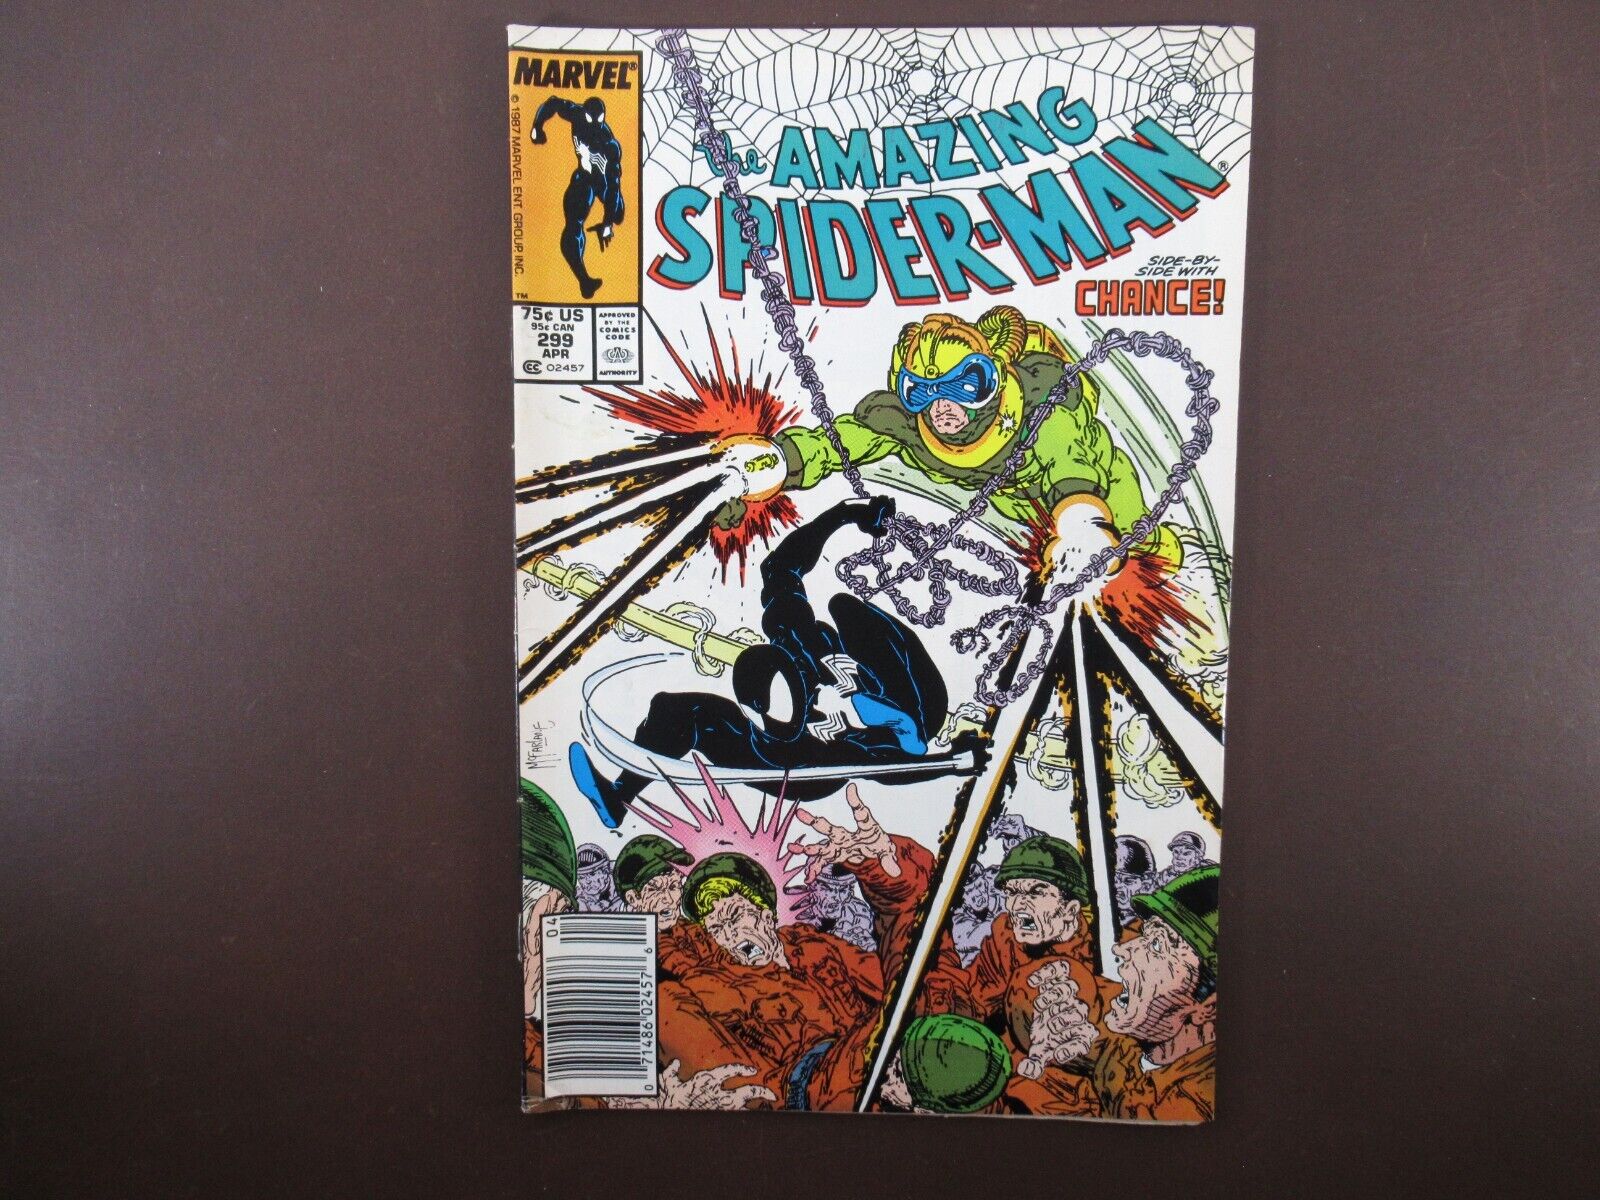 Marvel The Amazing Spider-Man, Edition #299, Side-By-Side with Chance  (H ED)